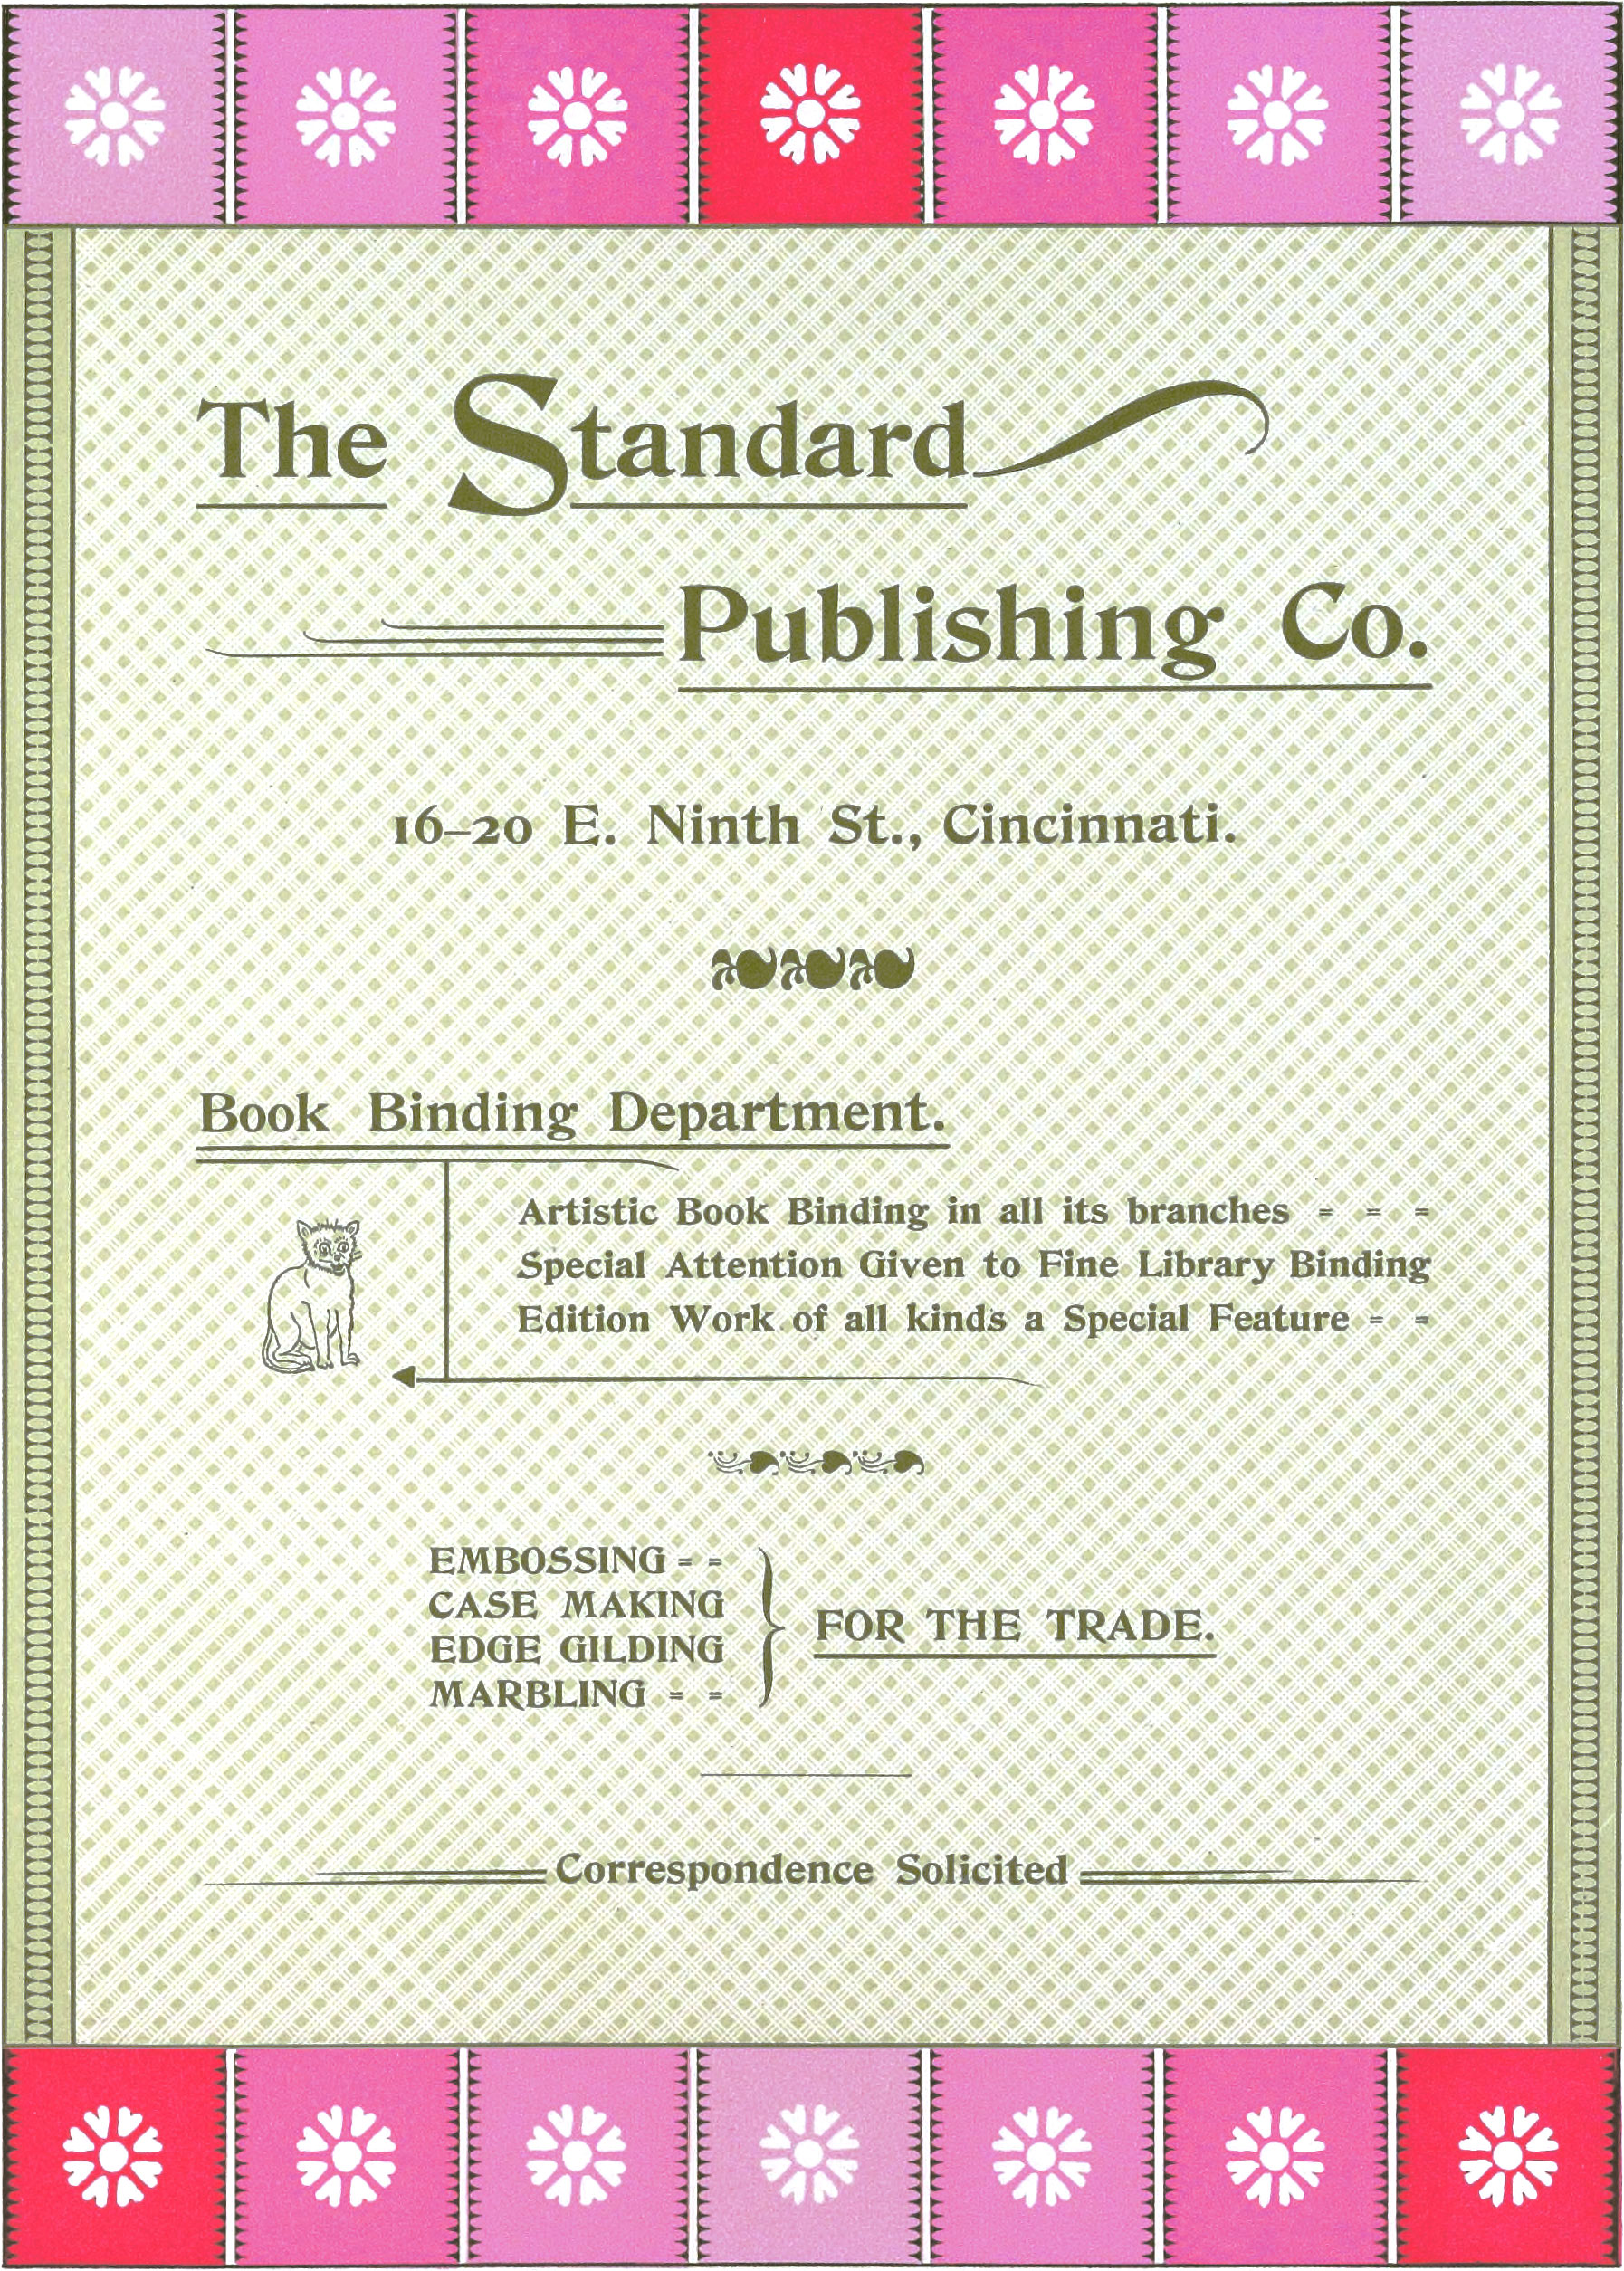 Printed advertisement for a publishing company with rose borders at top and bottom and green patterns and borders in the middle